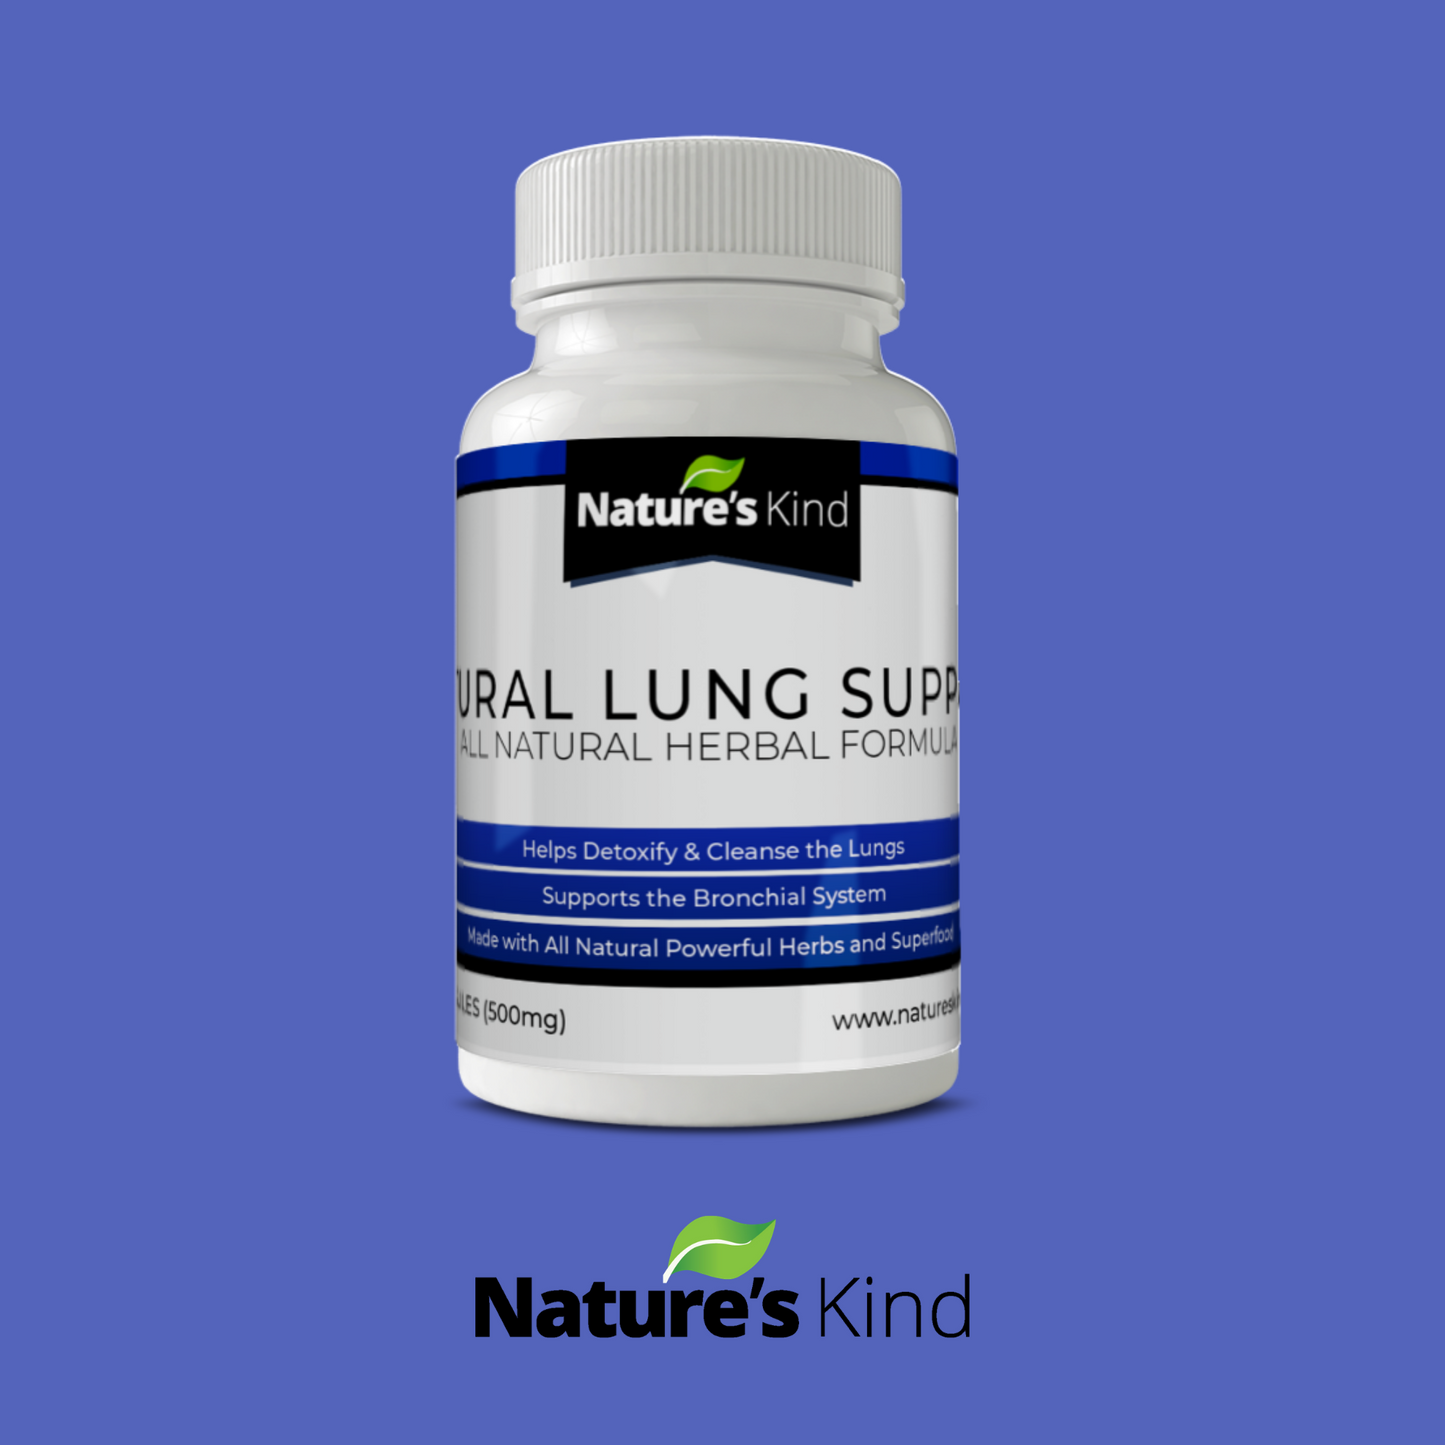 Natural Lung Support - with HERBS for Bronchial Wellness & Clearer Breathing